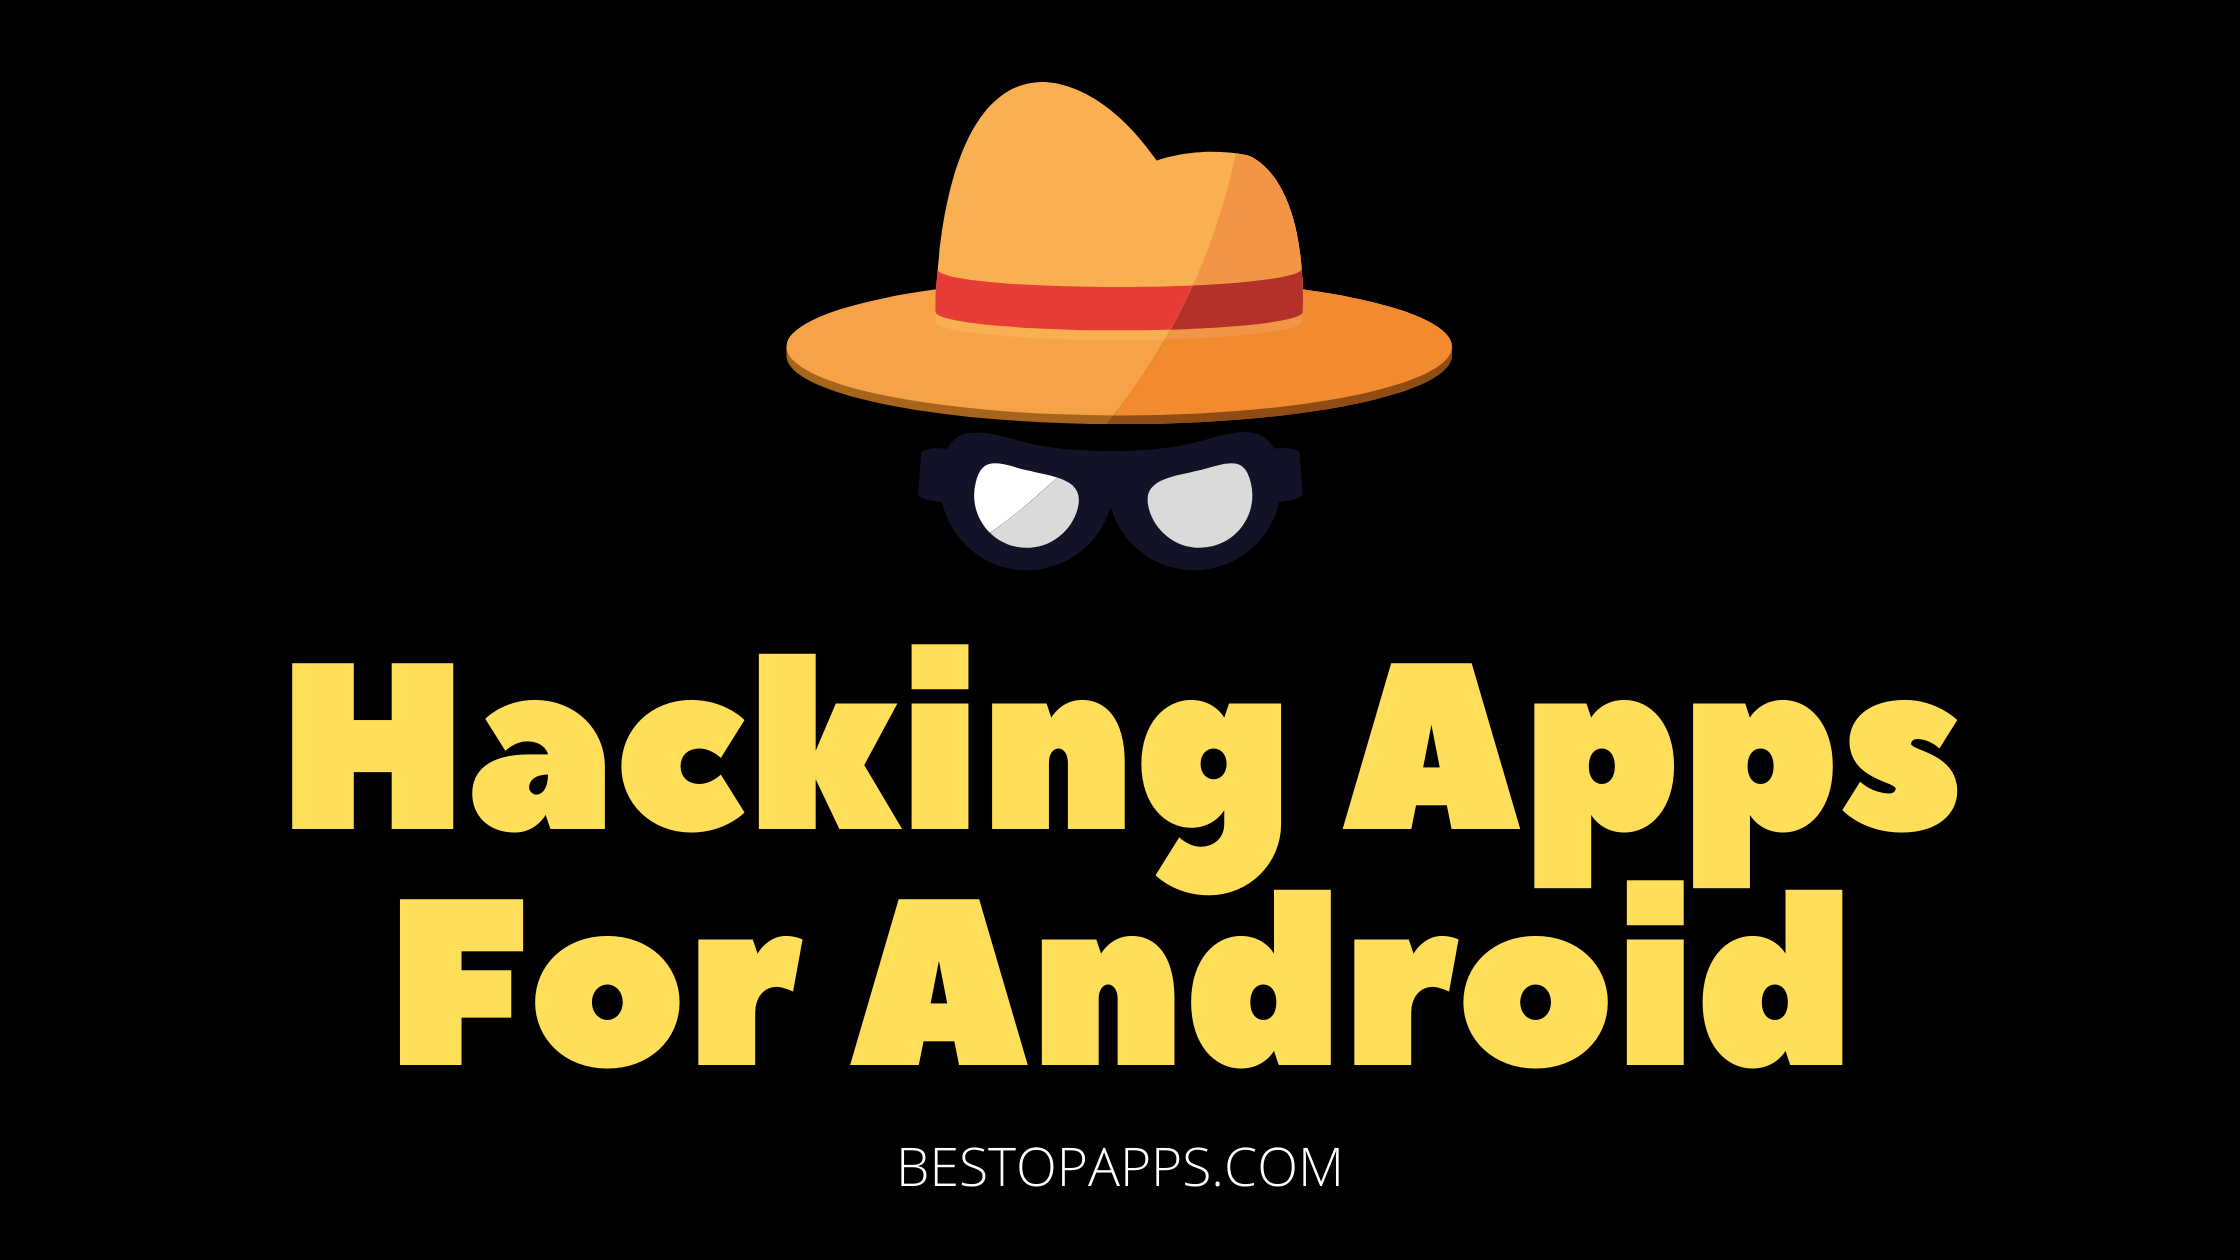 Hacking Apps For Android